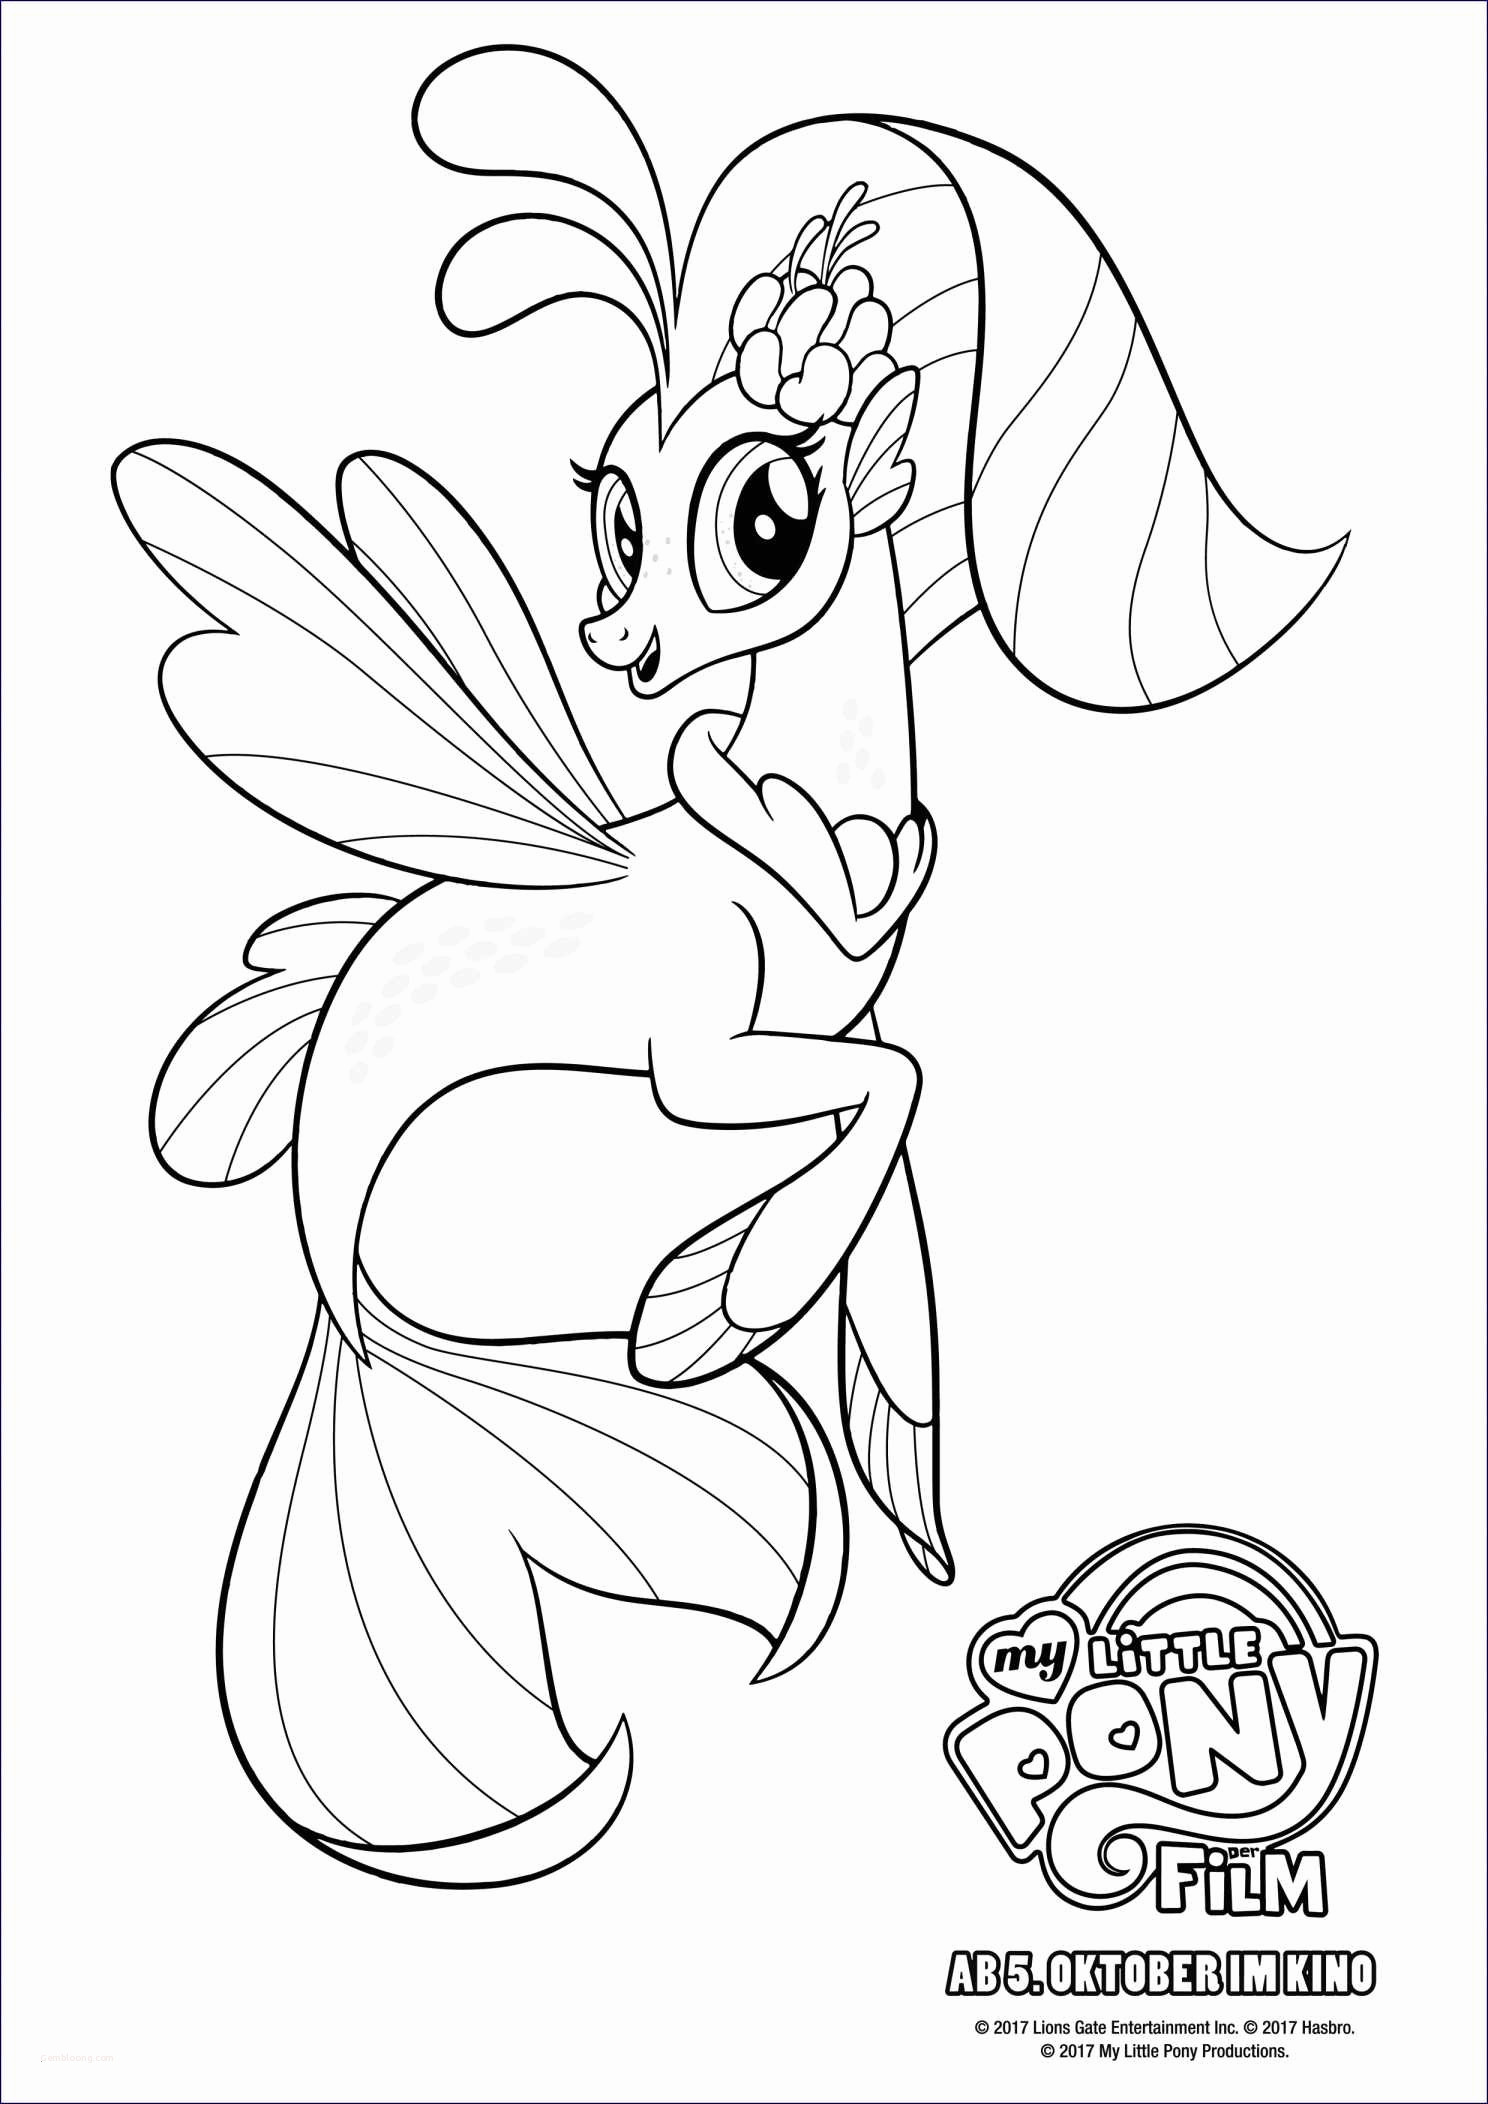 coloring pages : My Little Pony Coloring Book Youtube Best Of My Little  Pony Ausmalbilder Frisch New My Little Pony My Little Pony Coloring Book  Youtube ~ peak